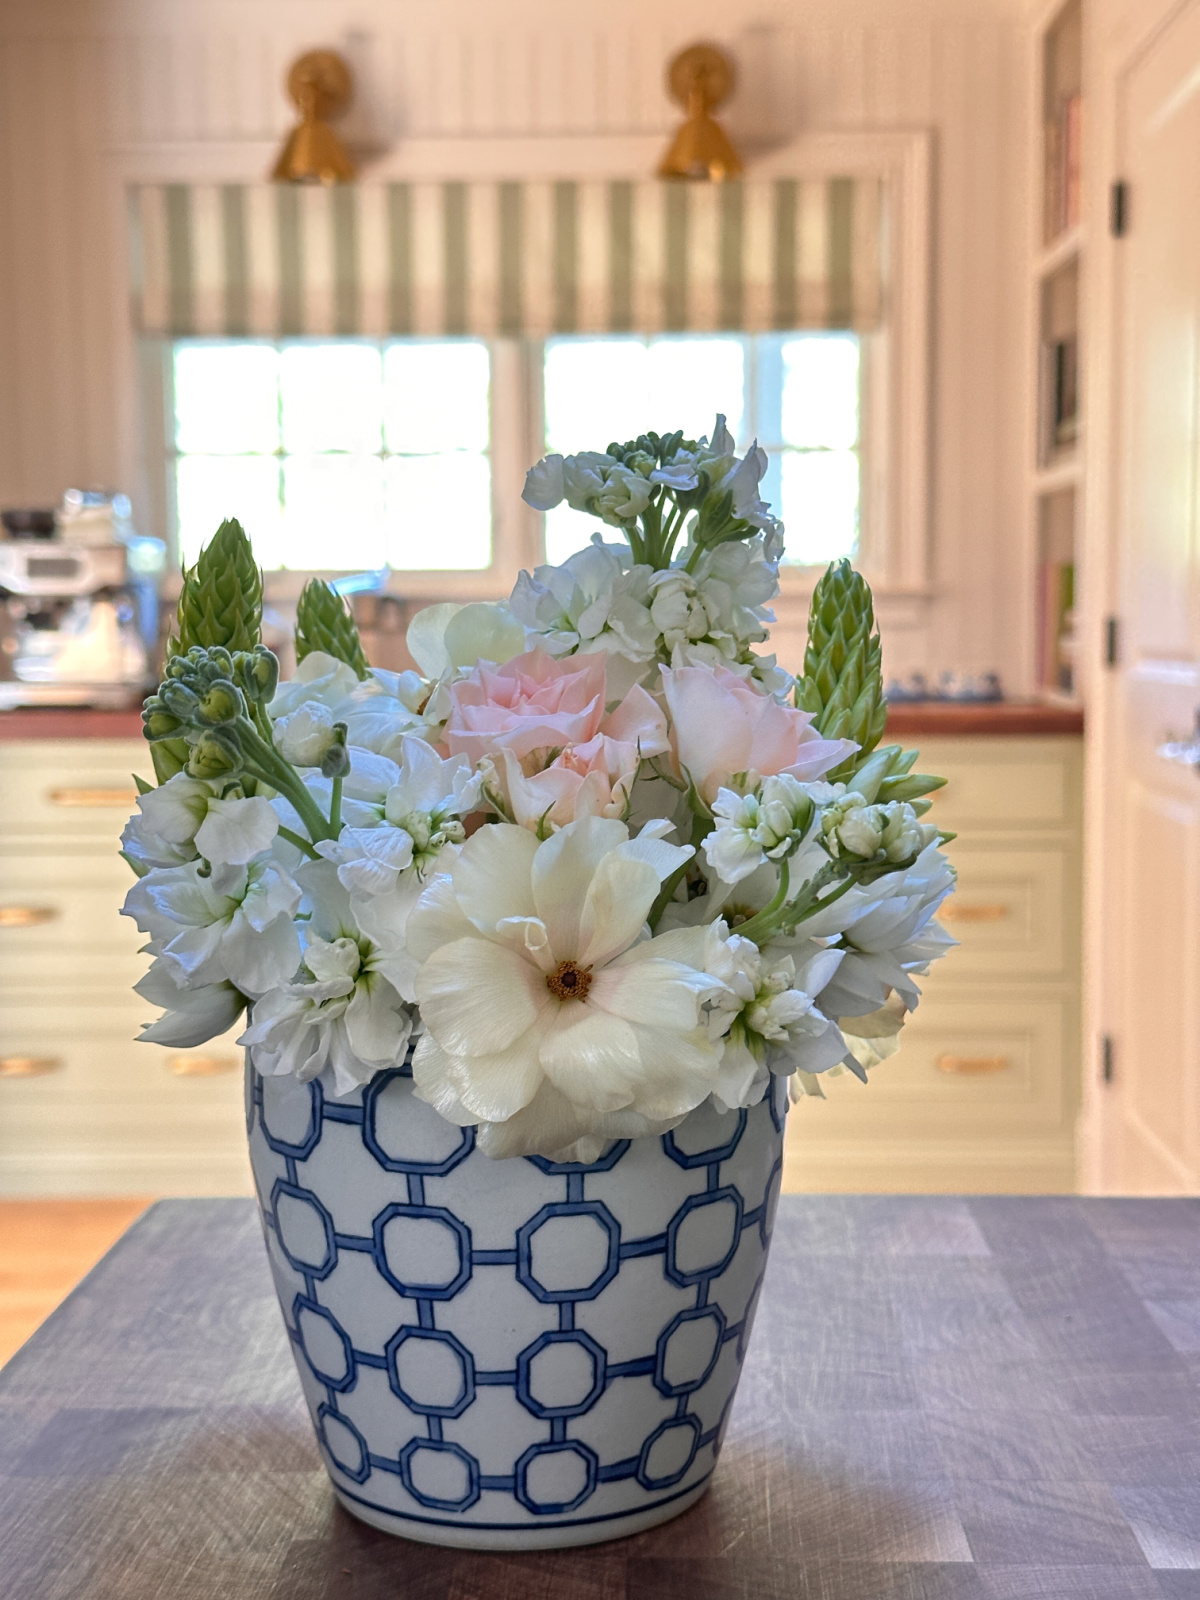 Blue and white planter filled with white and pink flowers sitting on a kitchen island.